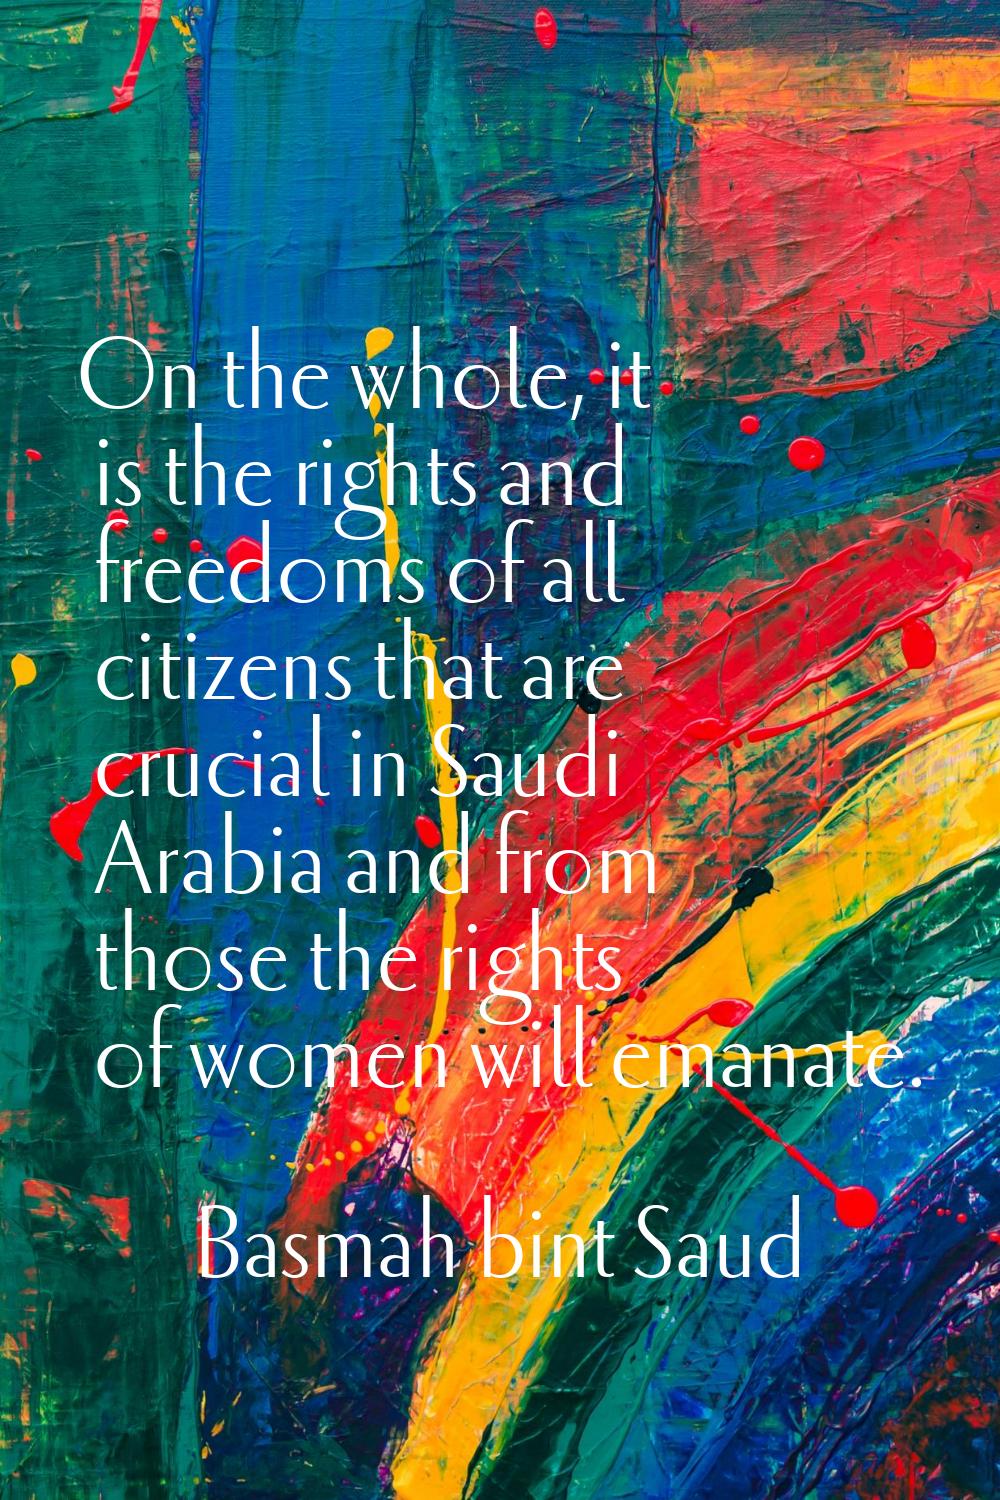 On the whole, it is the rights and freedoms of all citizens that are crucial in Saudi Arabia and fr